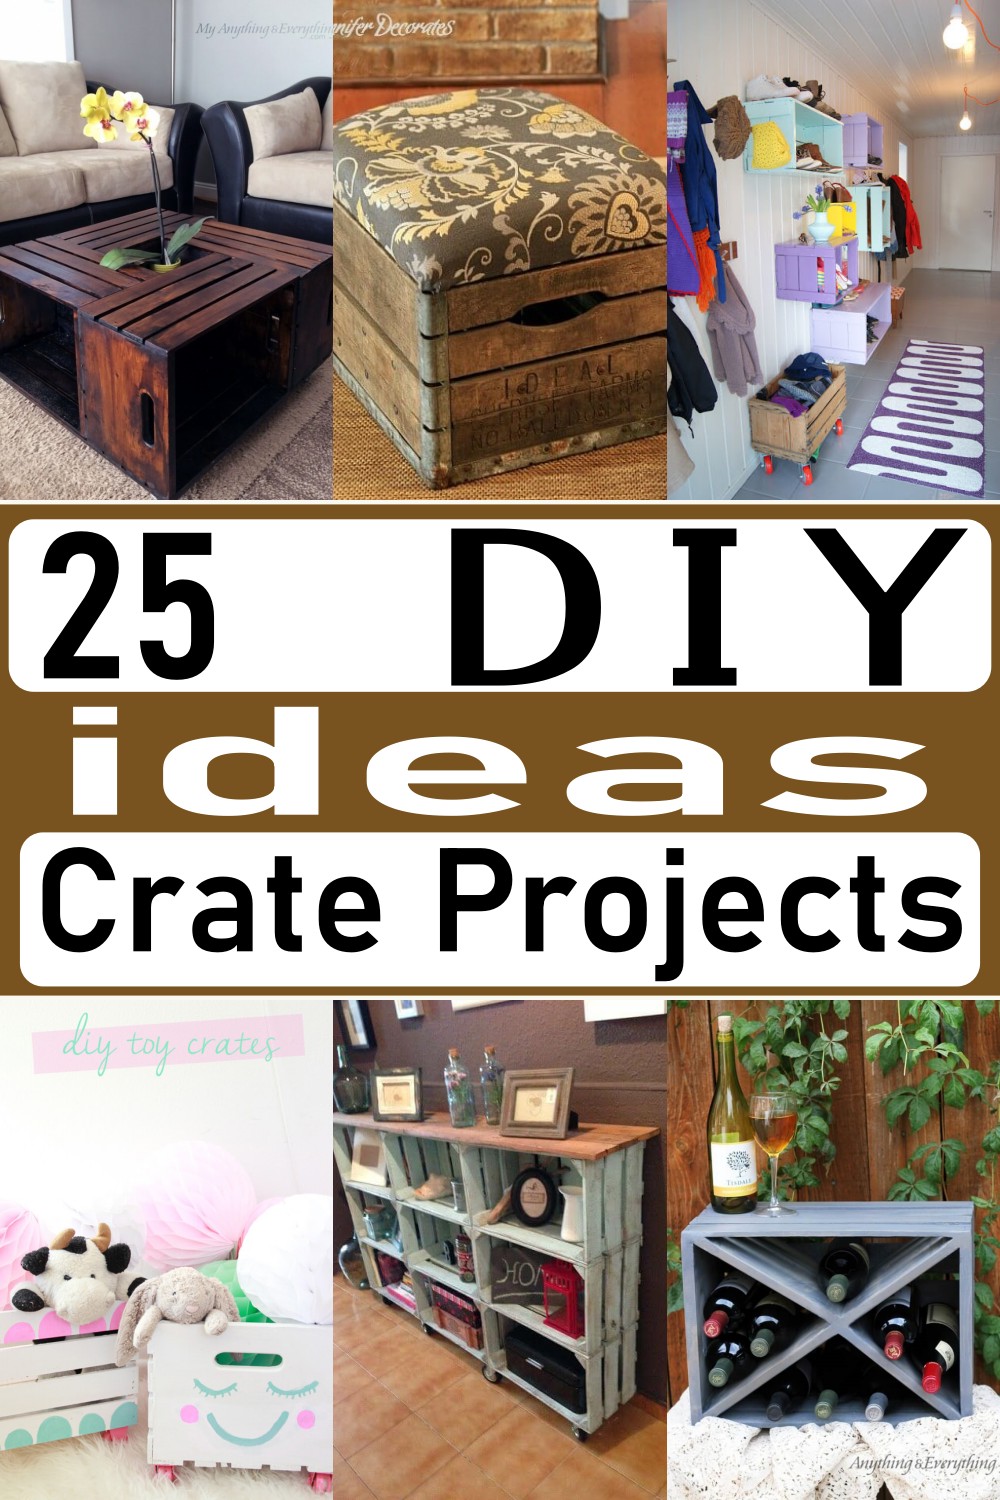 Crate Projects